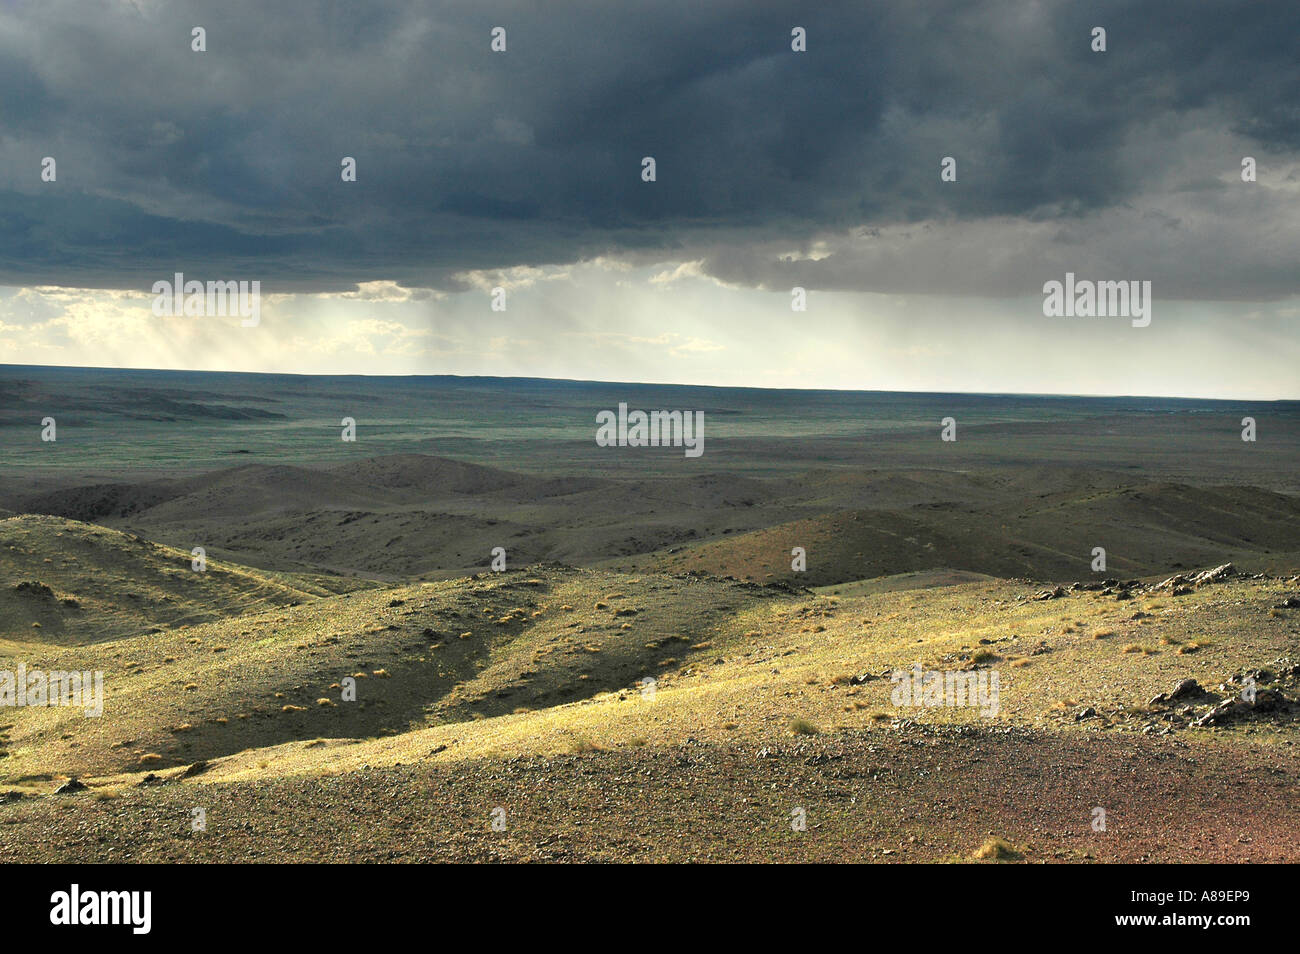 Wide steppe landscape with dark clouds near Ongiyn monastery Mongolia Stock Photo